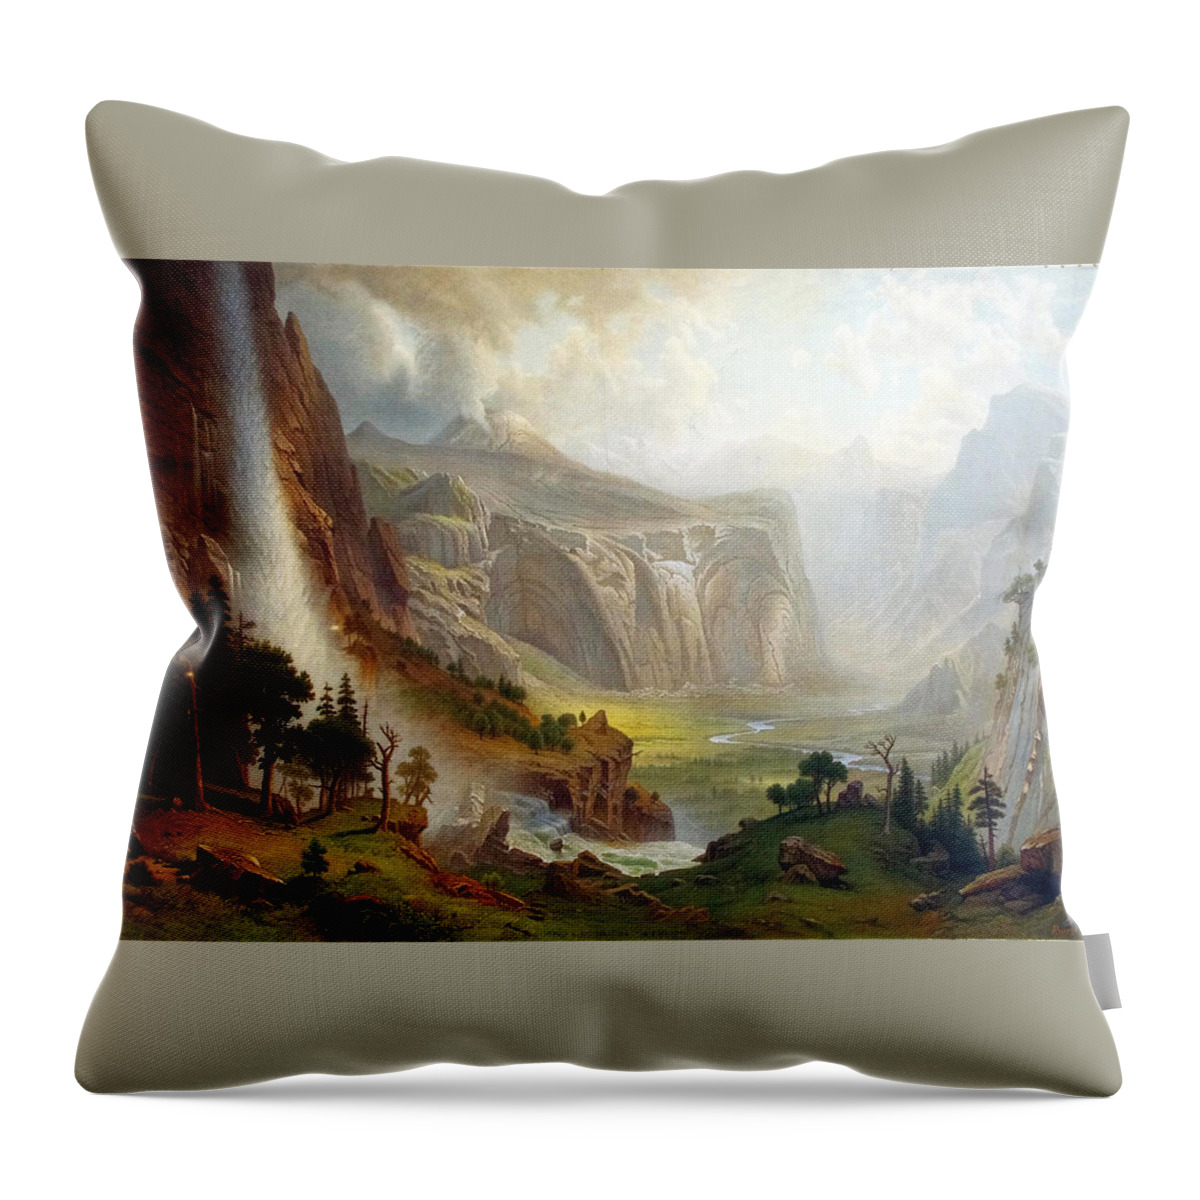 The Domes Of The Yosemitealbert Bierstadt Throw Pillow featuring the painting The Domes of the Yosemite by Albert Bierstadt